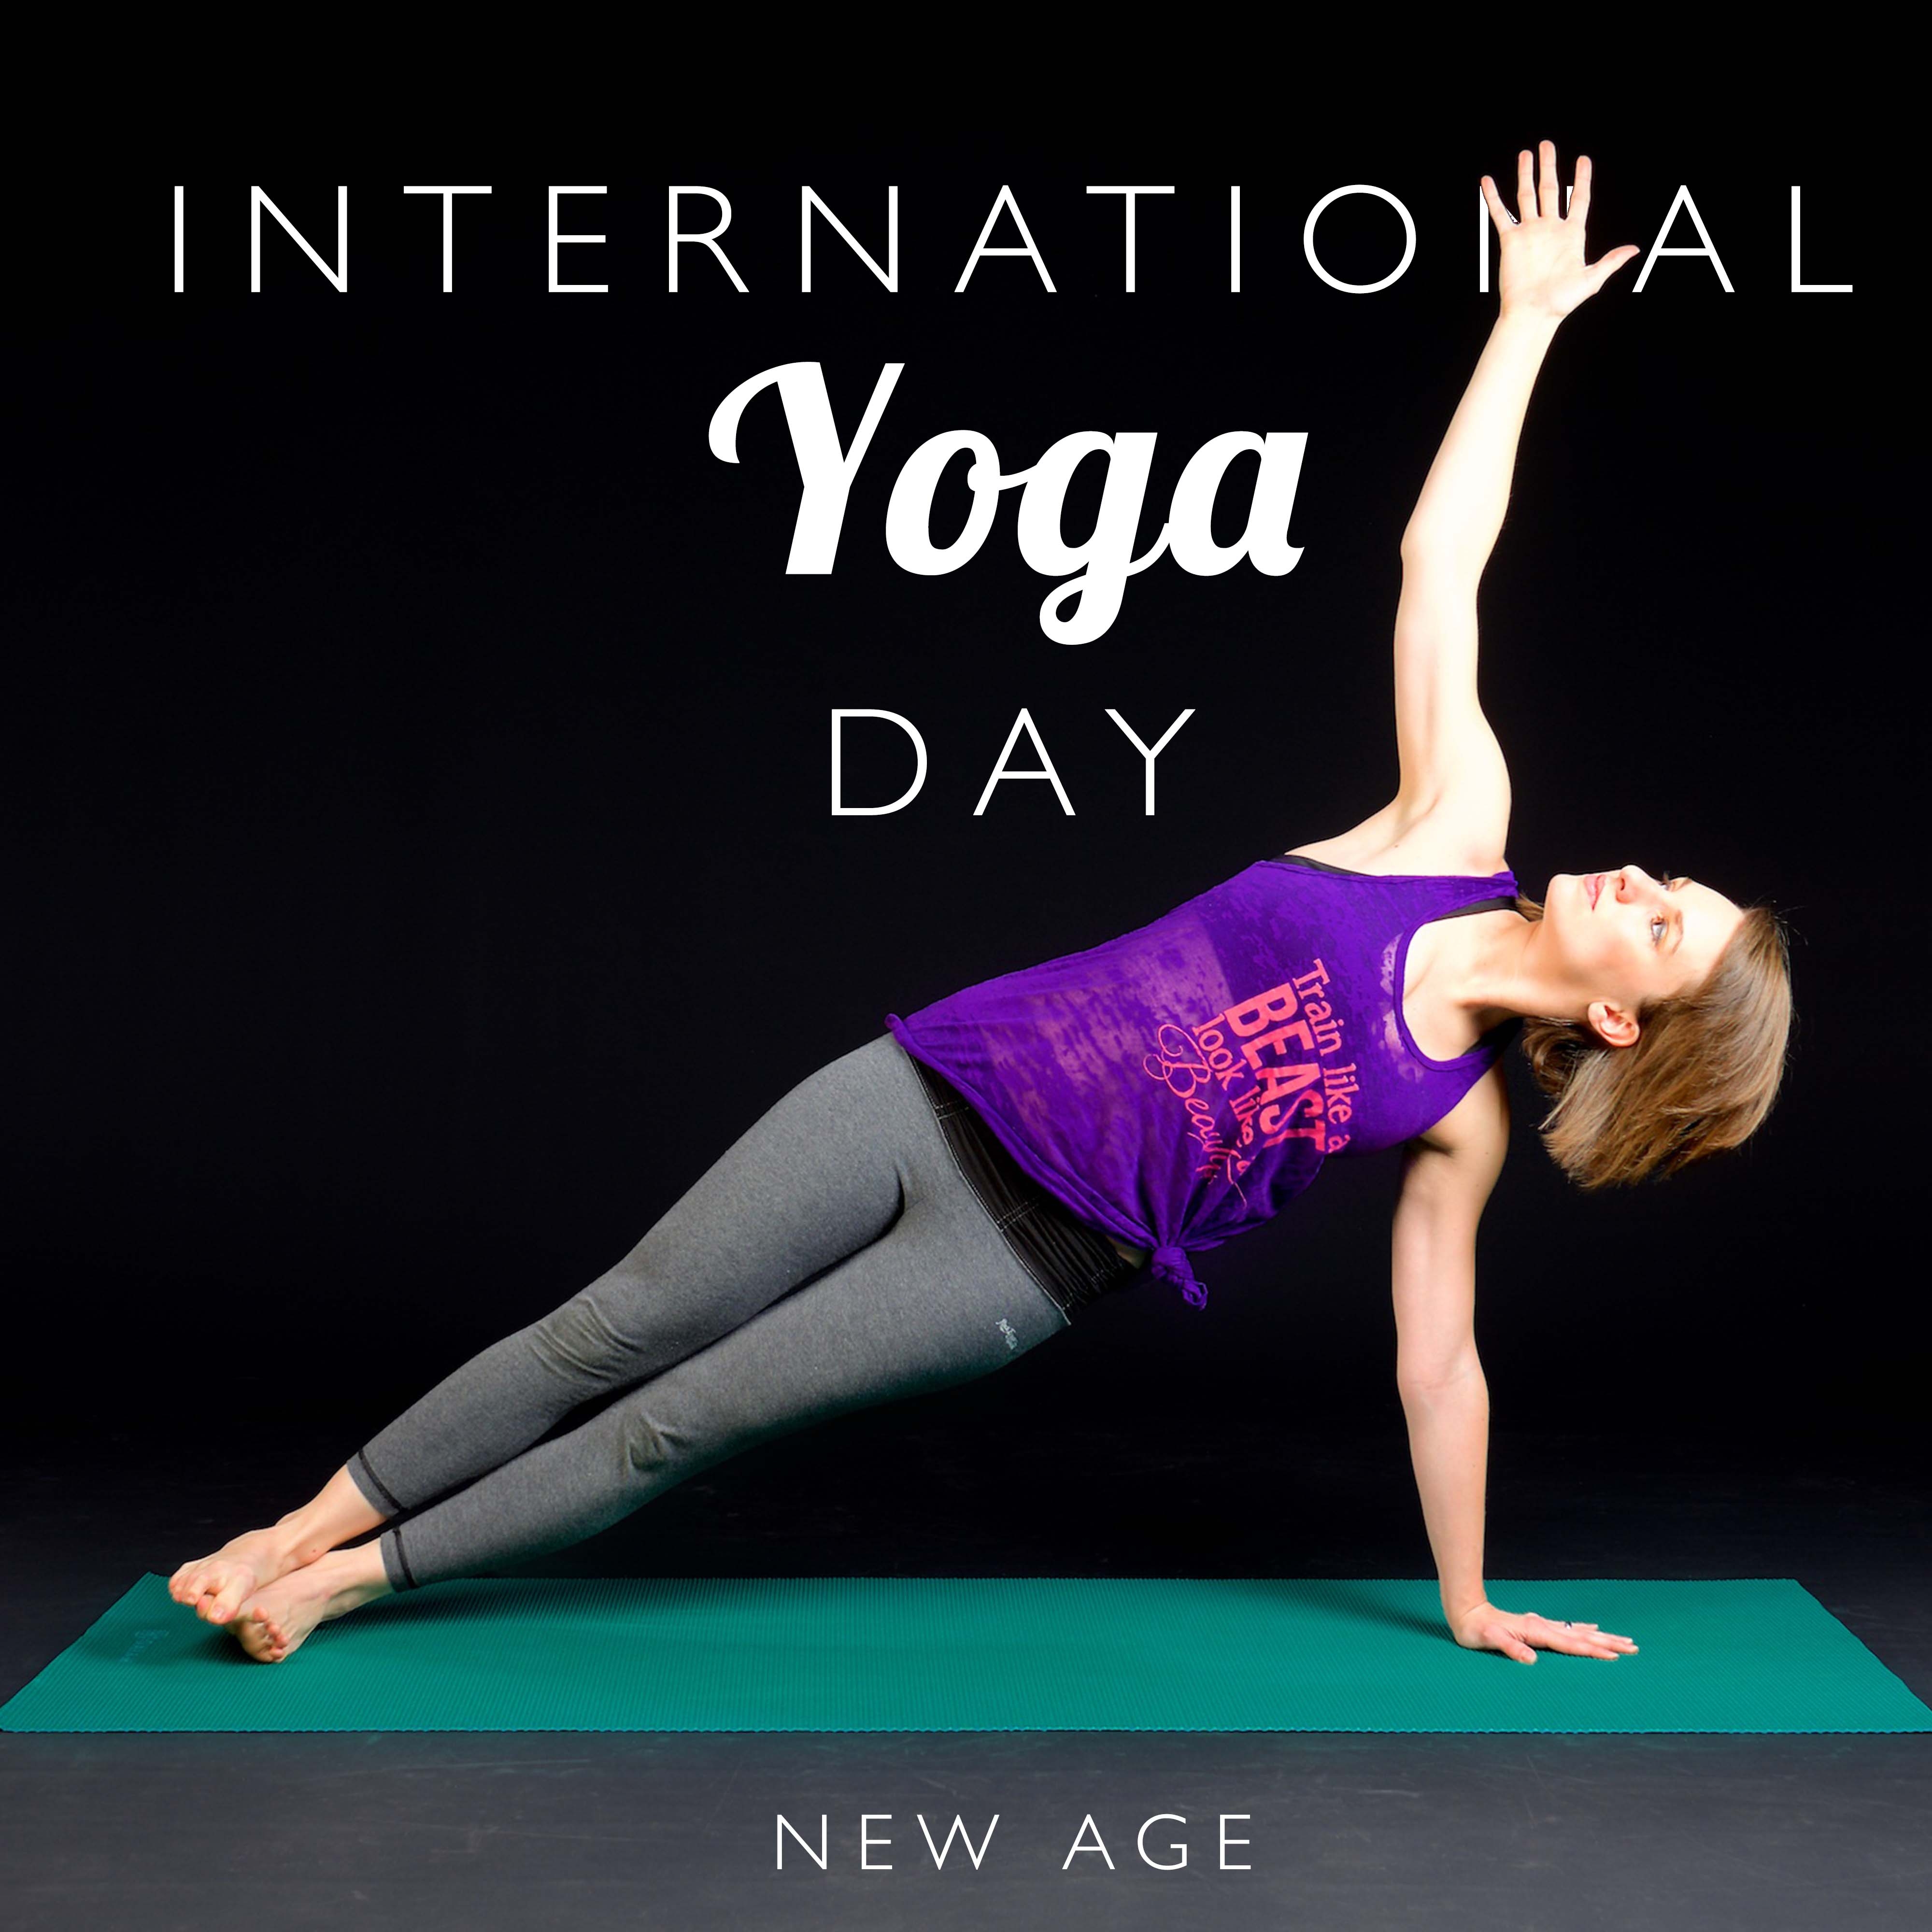 International Yoga Day - A Collection of the Best New Age Music for your Yoga Practice